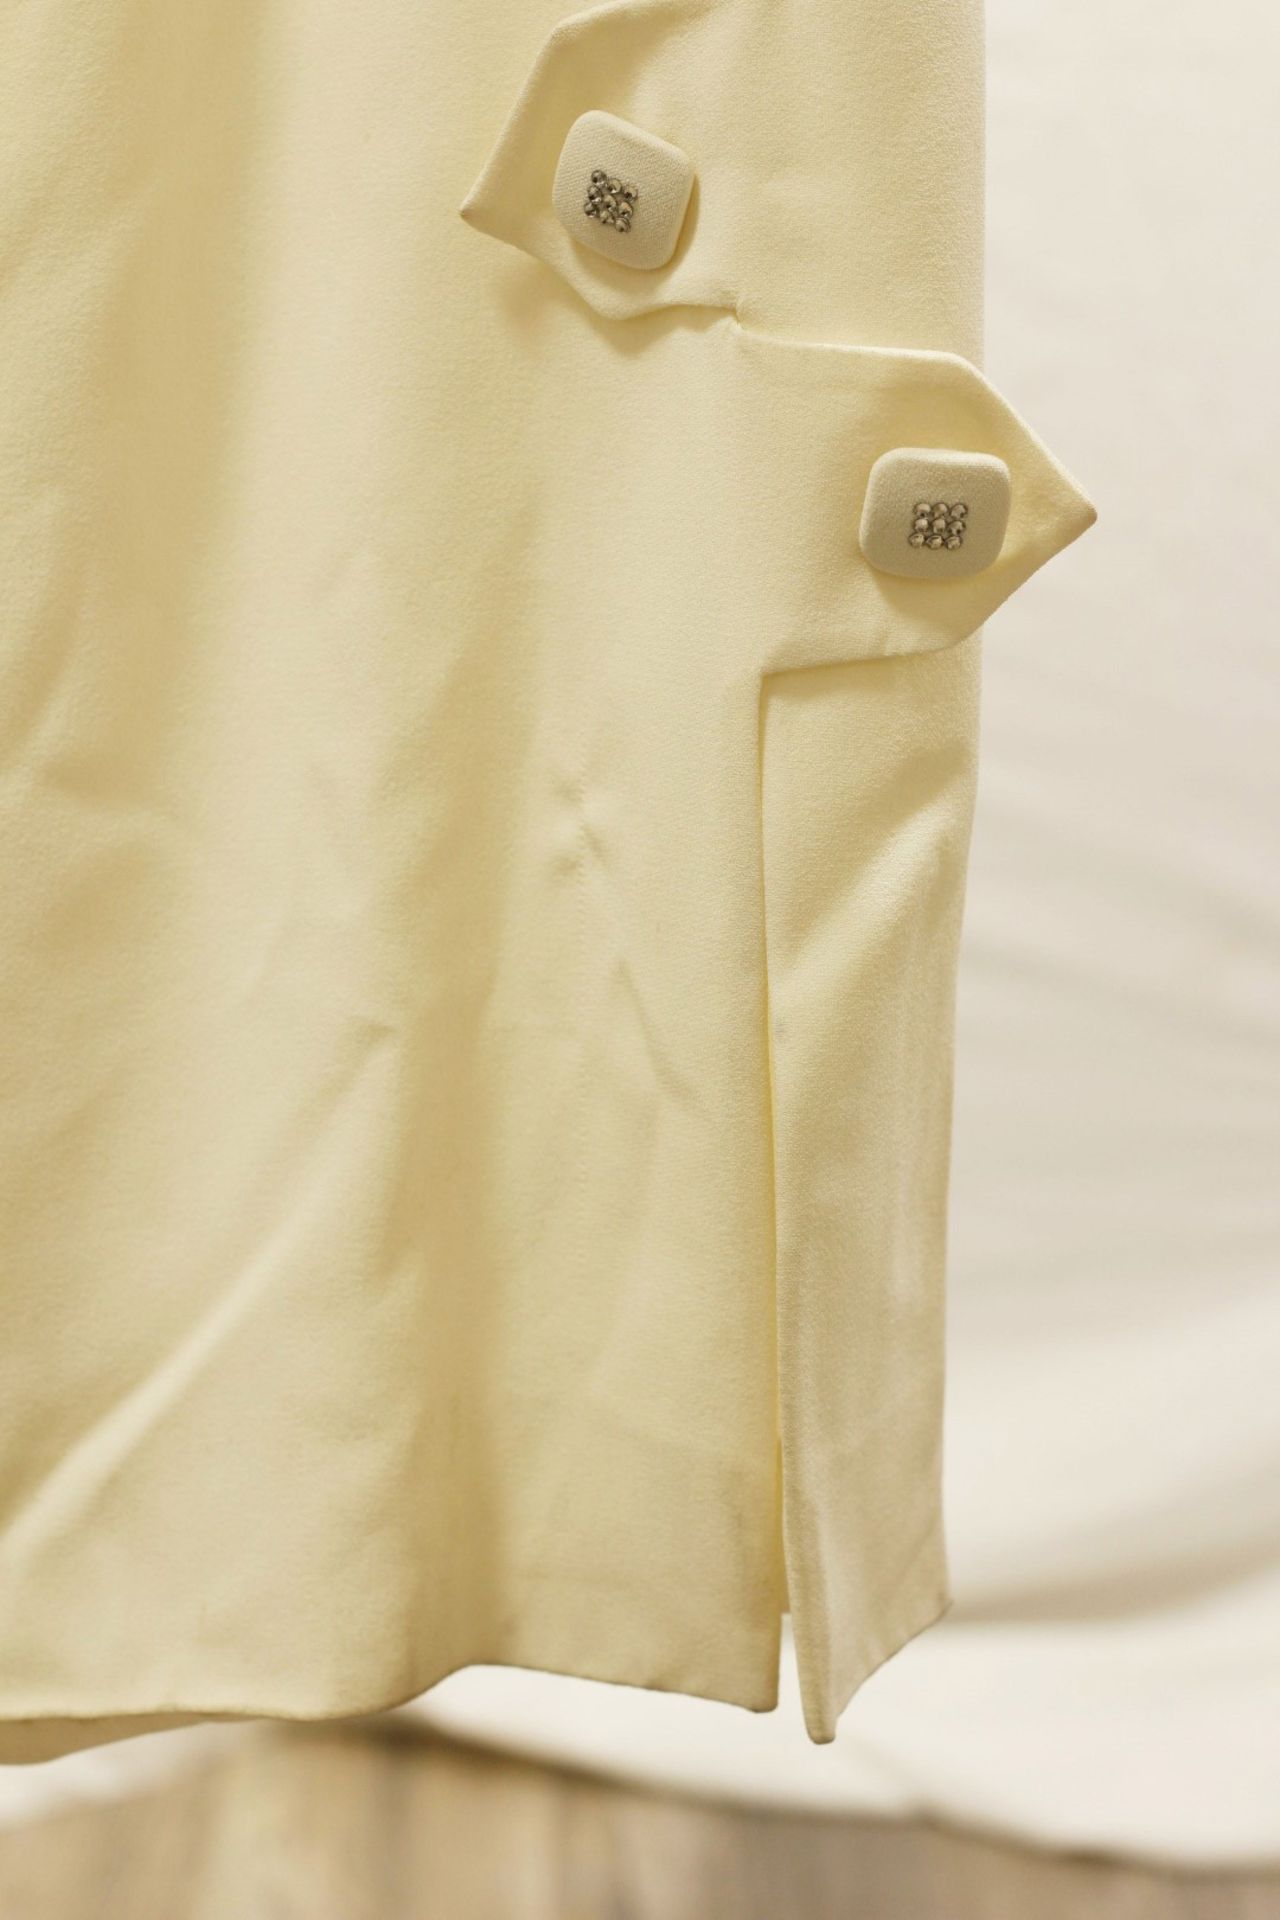 1 x Boutique Le Duc Cream Suit (Jacket And Trousers) - Size: 12 - Material: 82% Acetate, 18% Viscose - Image 9 of 13